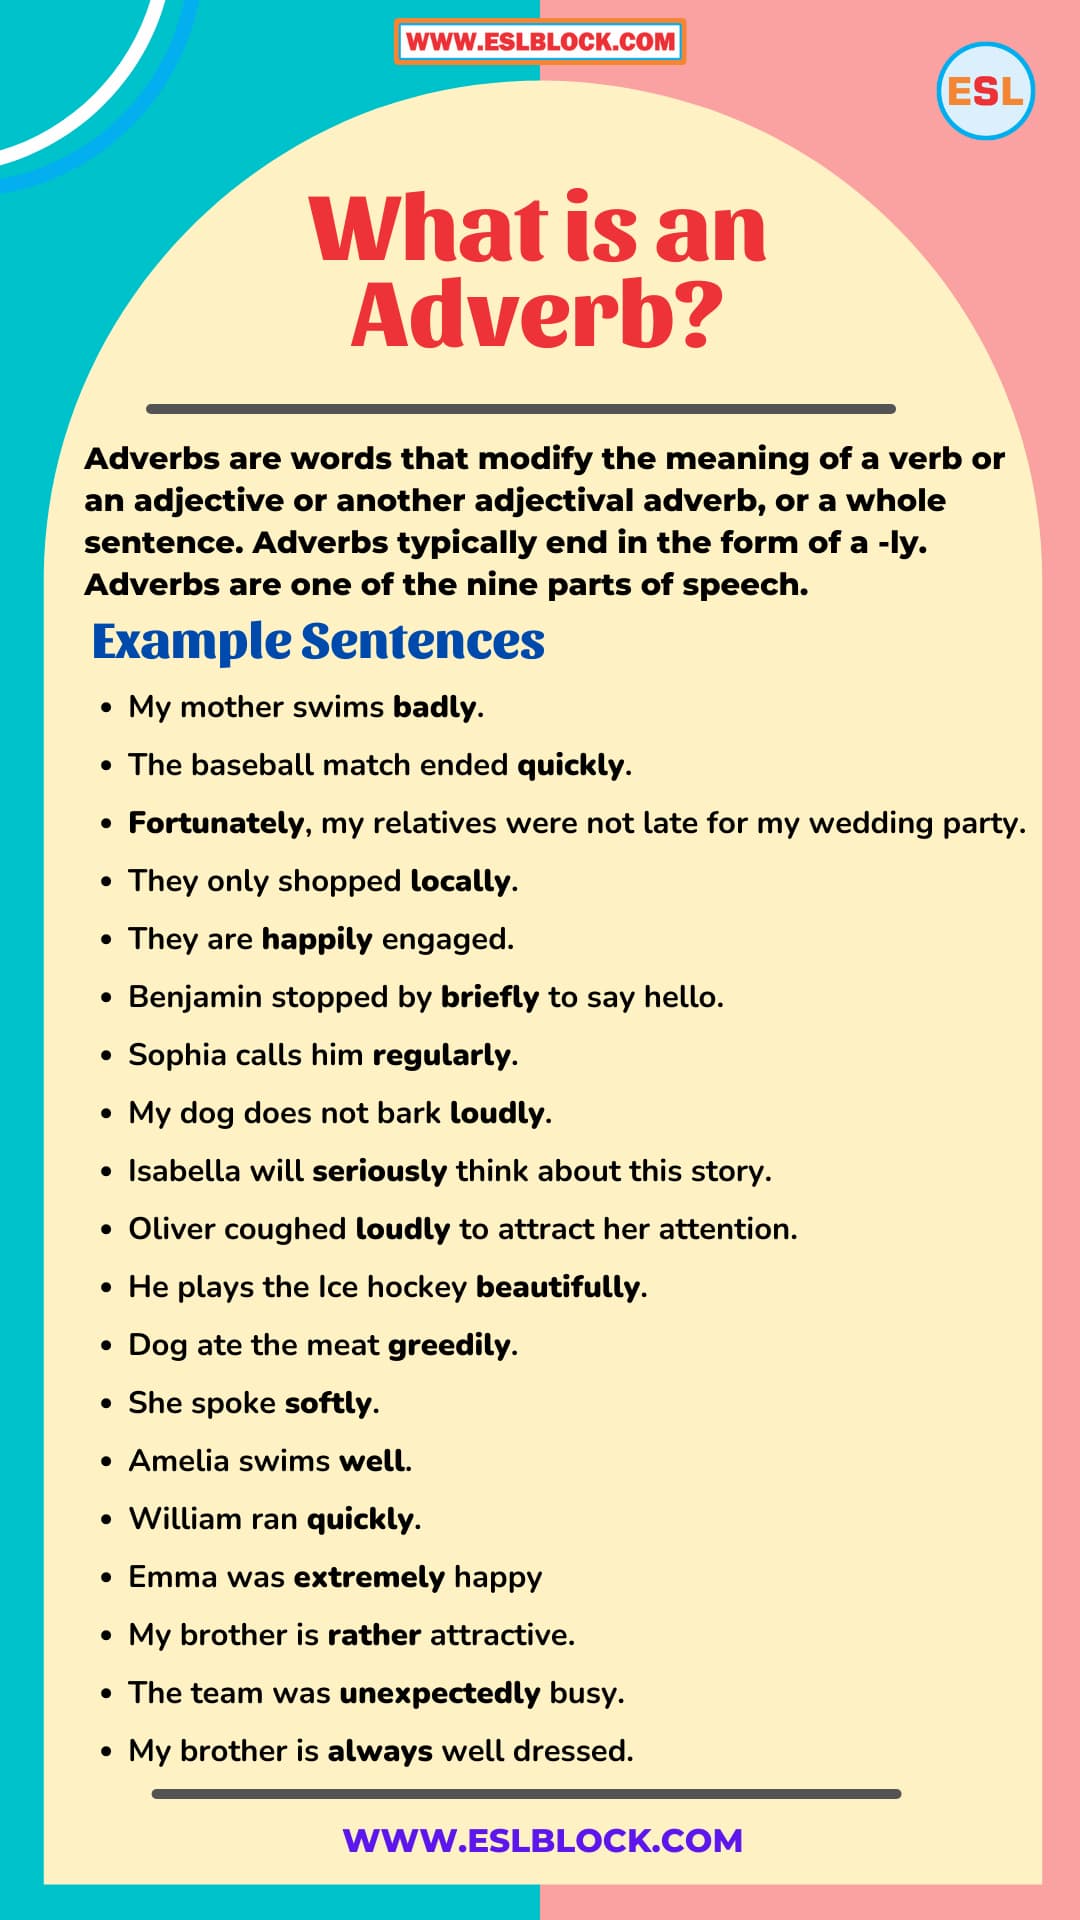 A Super Simple Guide to Adverbs, Adverb Definition, Adverb Examples, Adverb of Certainty, Adverb of Degree, Adverb of Manner, Adverb of Place, Adverb of Time, Adverb Rules, Adverbs of Attitude, Adverbs of Judgement, Adverbs Used in Sentences, Adverbs with Examples, Adverbs with Verbs, Conjunctive Adverb, English Grammar, How to Use Adverbs, Parts of Speech, Parts of Speech in English Grammar, The Importance of Adverbs, Types of Adverbs, What is an Adverb